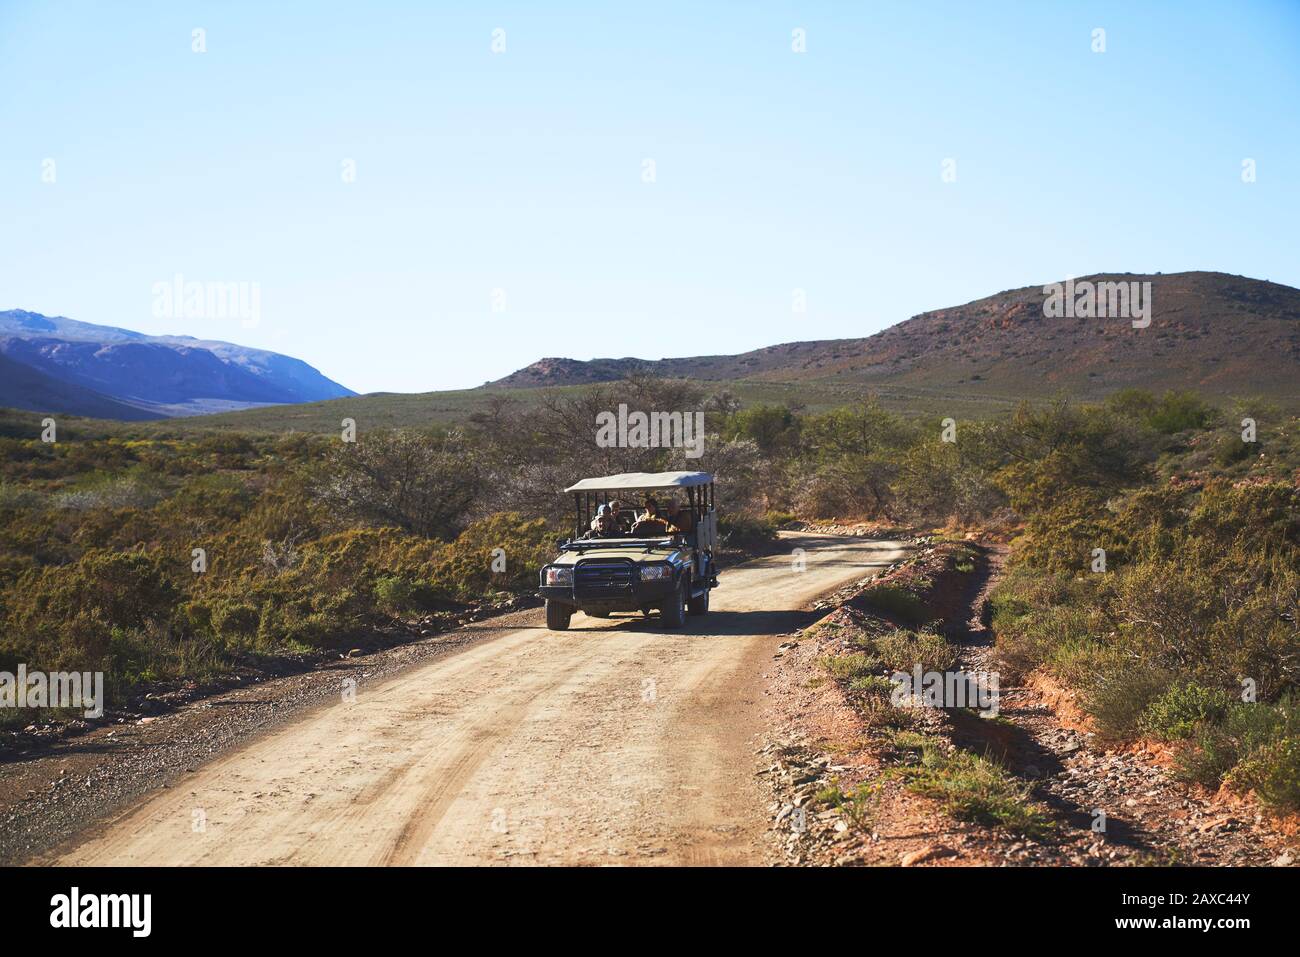 Safari off-road vehicle on sunny emote dirt road South Africa Stock Photo